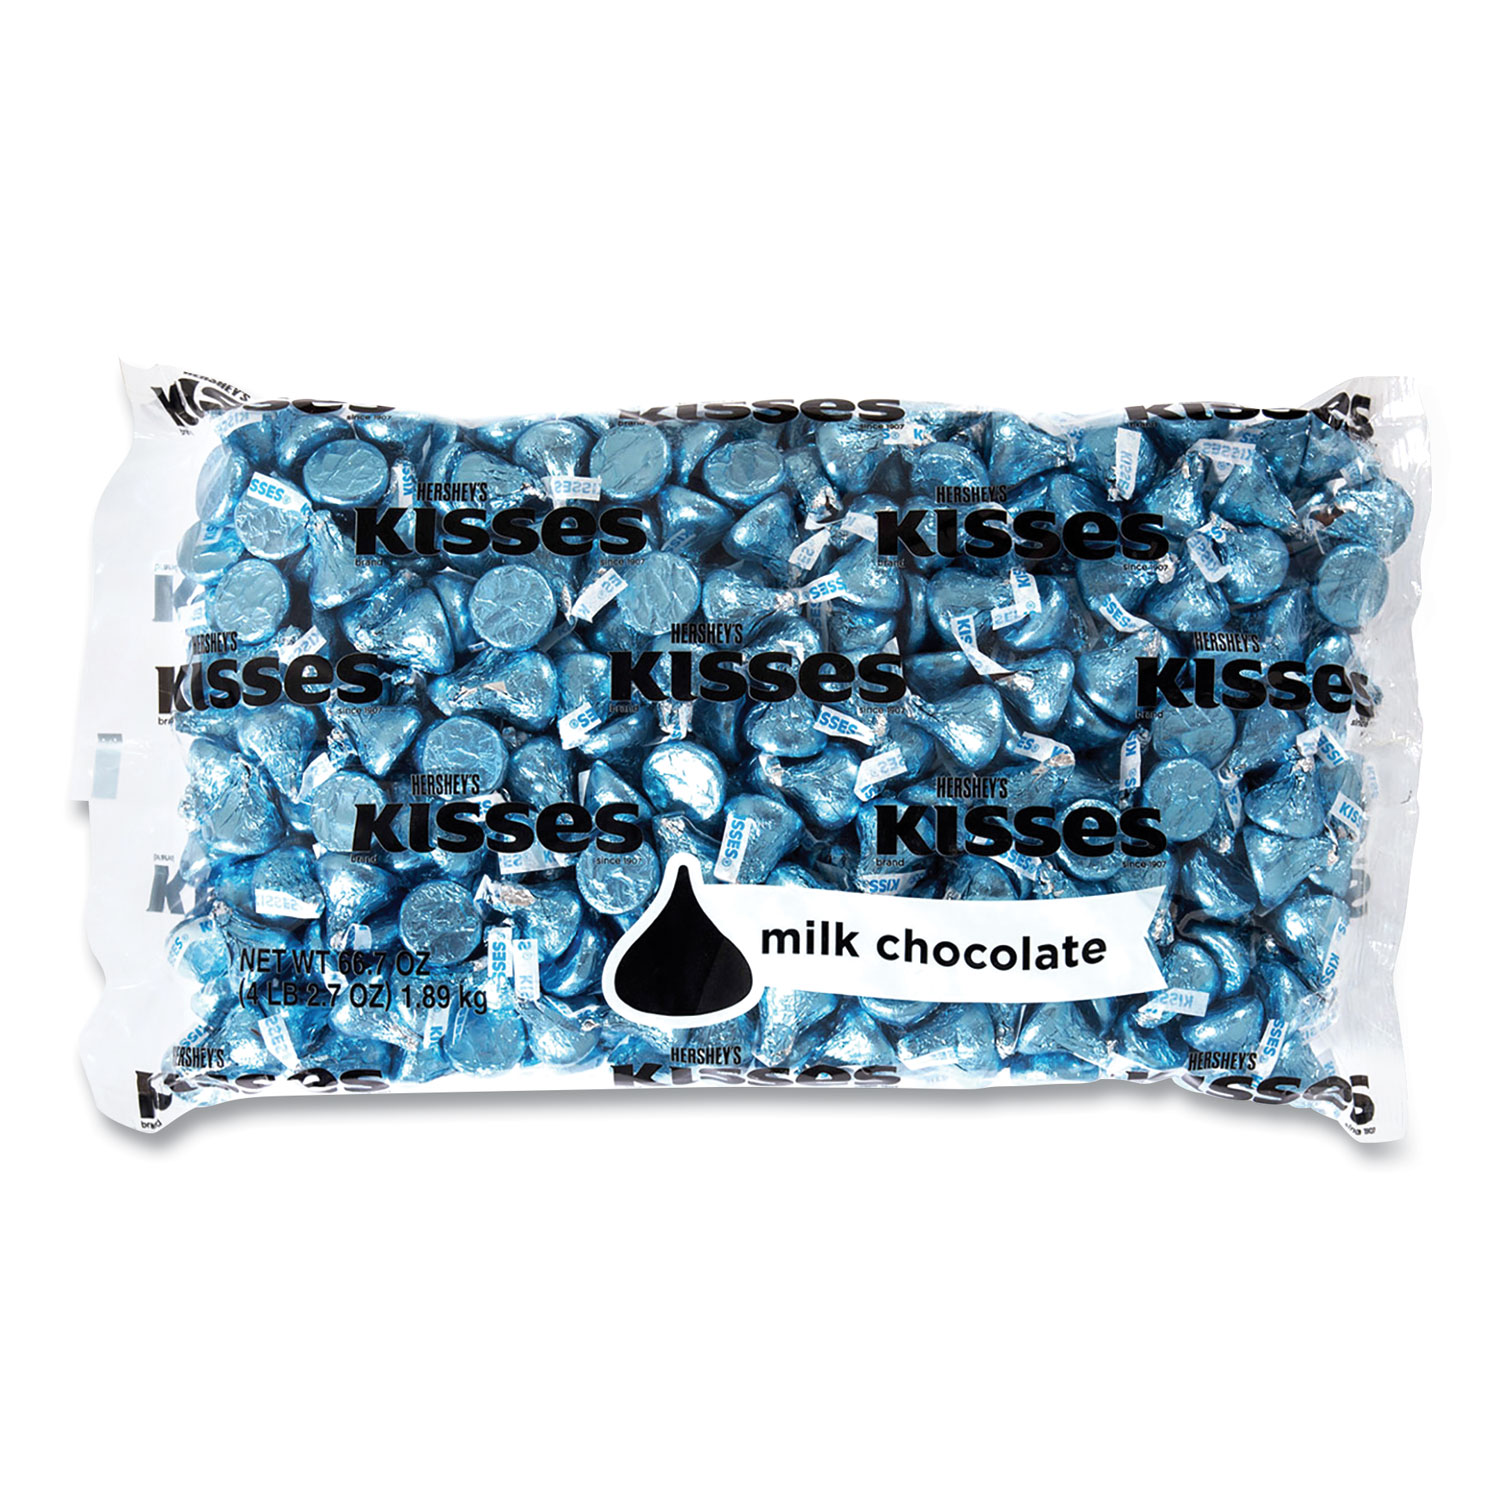  Hershey's 13344 KISSES, Milk Chocolate, Blue Wrappers, 66.7 oz Bag, Free Delivery in 1-4 Business Days (GRR24600053) 